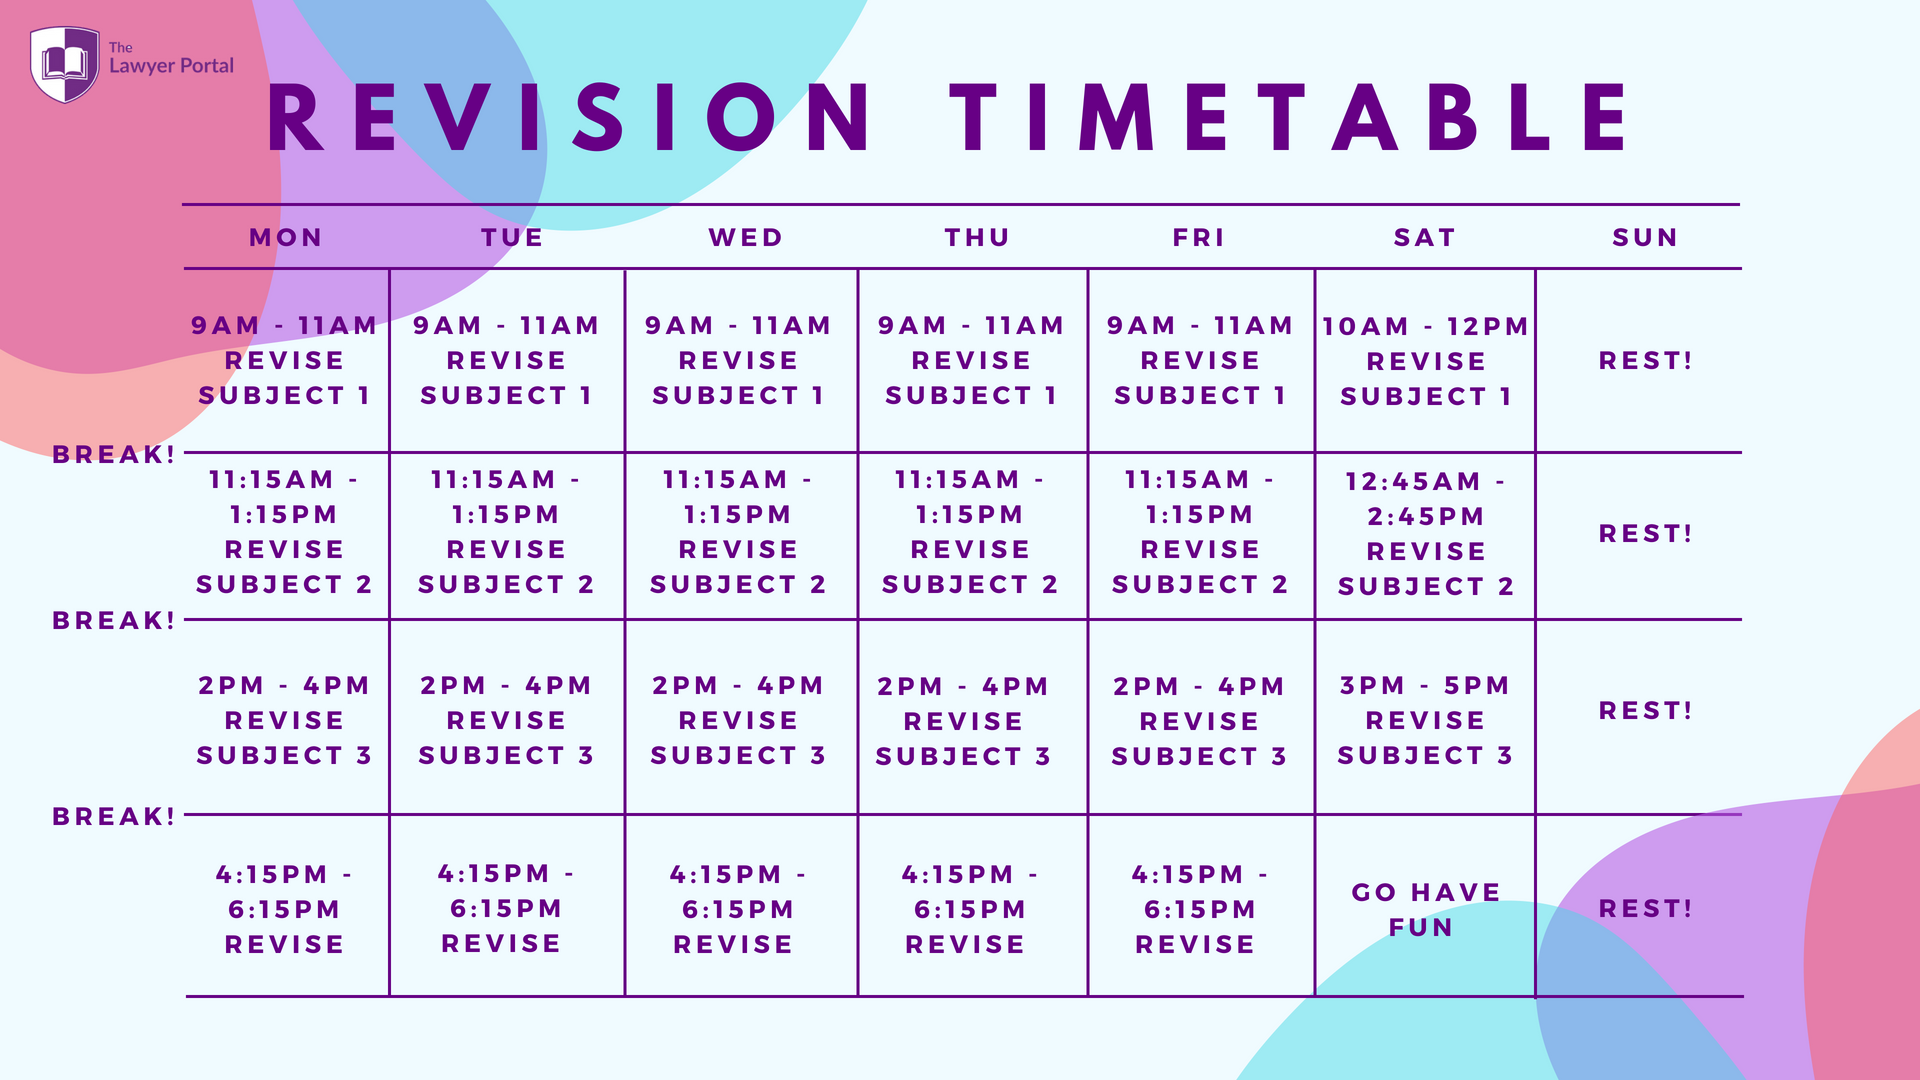 The Ultimate Revision Timetable - The Lawyer Portal